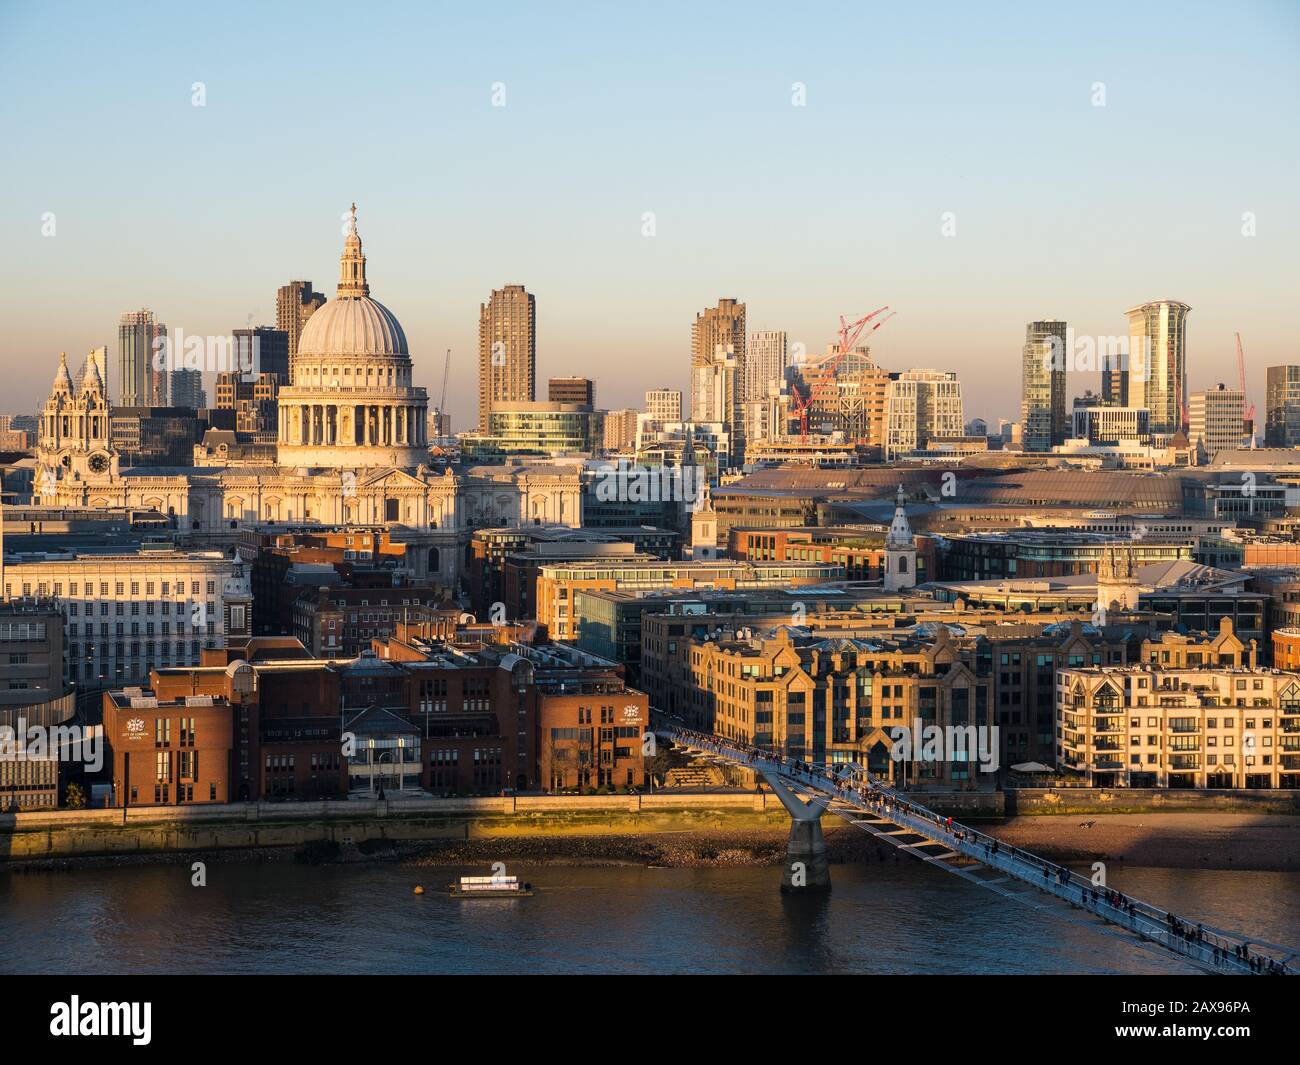 St Paul's Cathedral, Sunset, City of London, England, UK, GB. Foto Stock